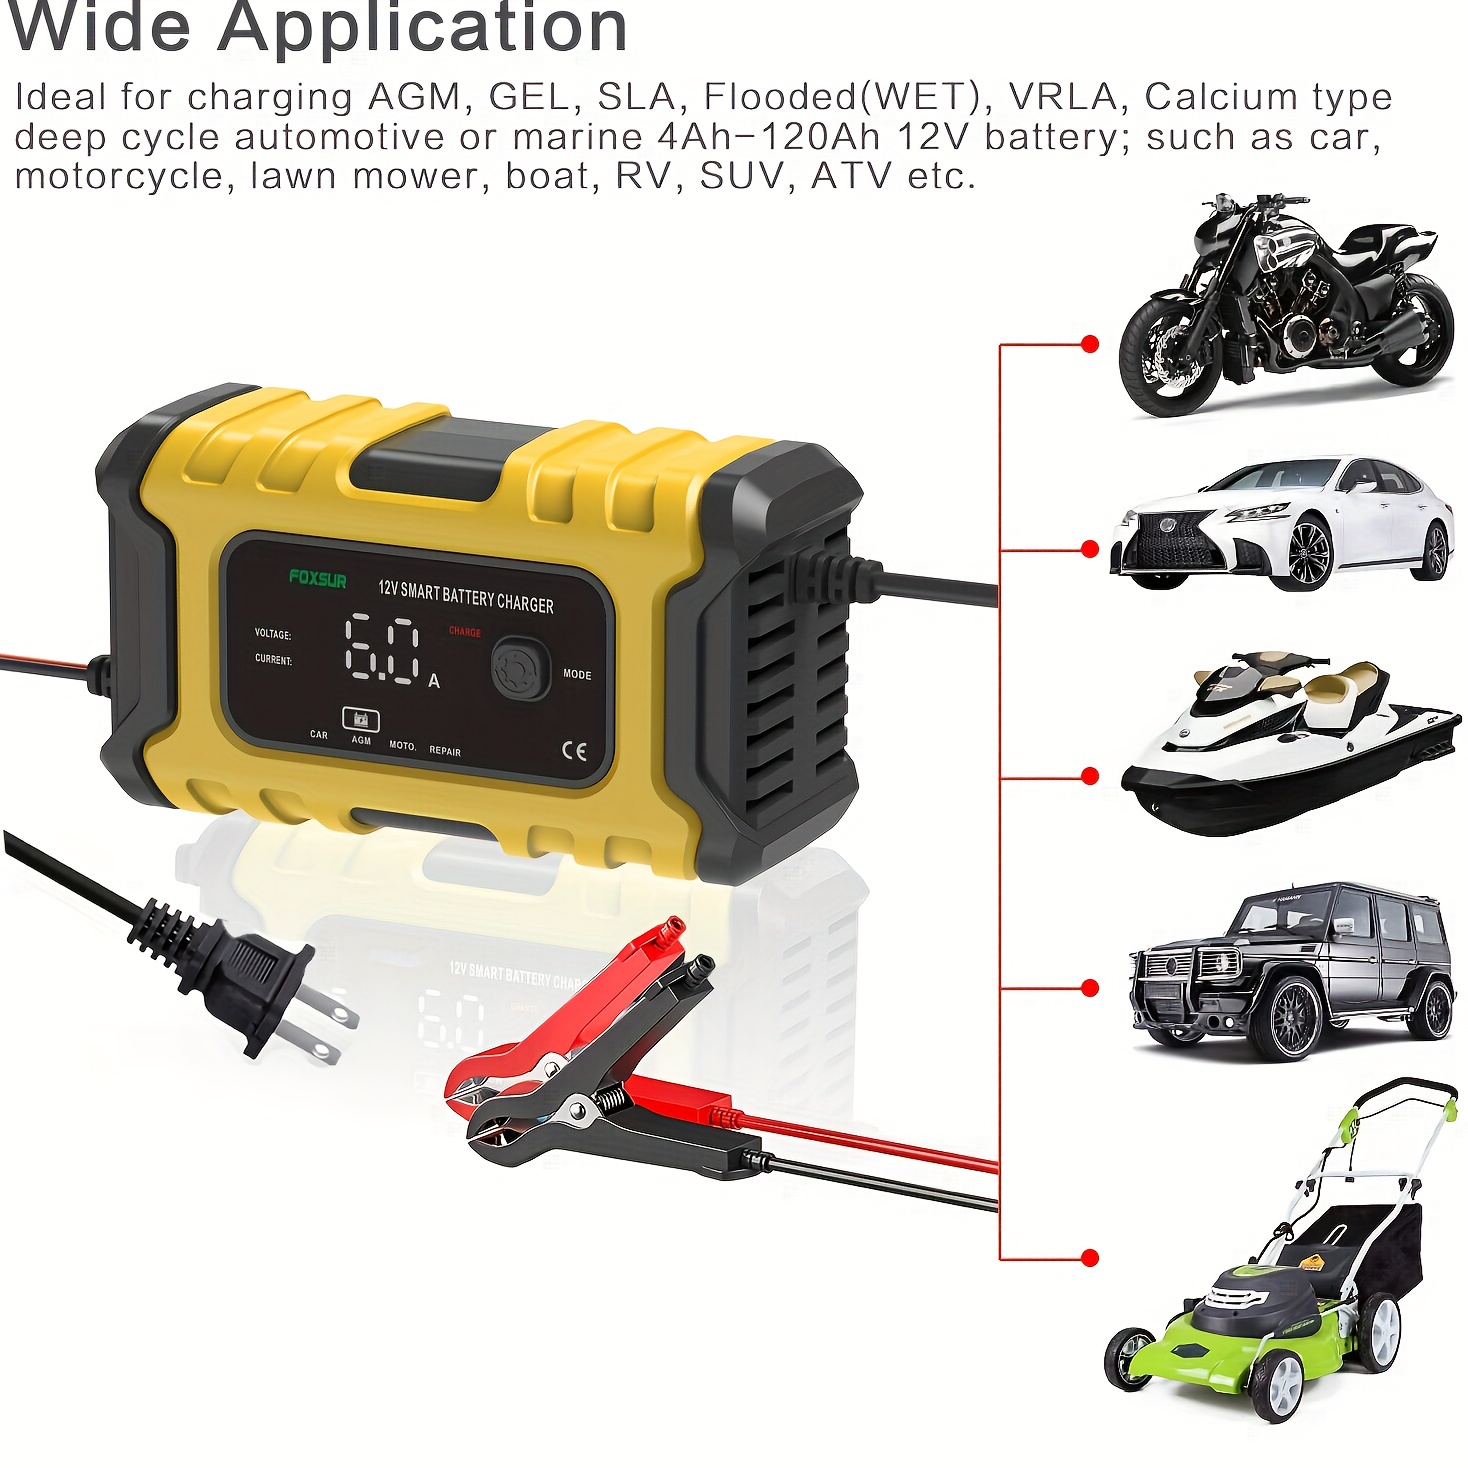 1pcar Battery Charger 12v 6a Smart Battery Trickle Charger